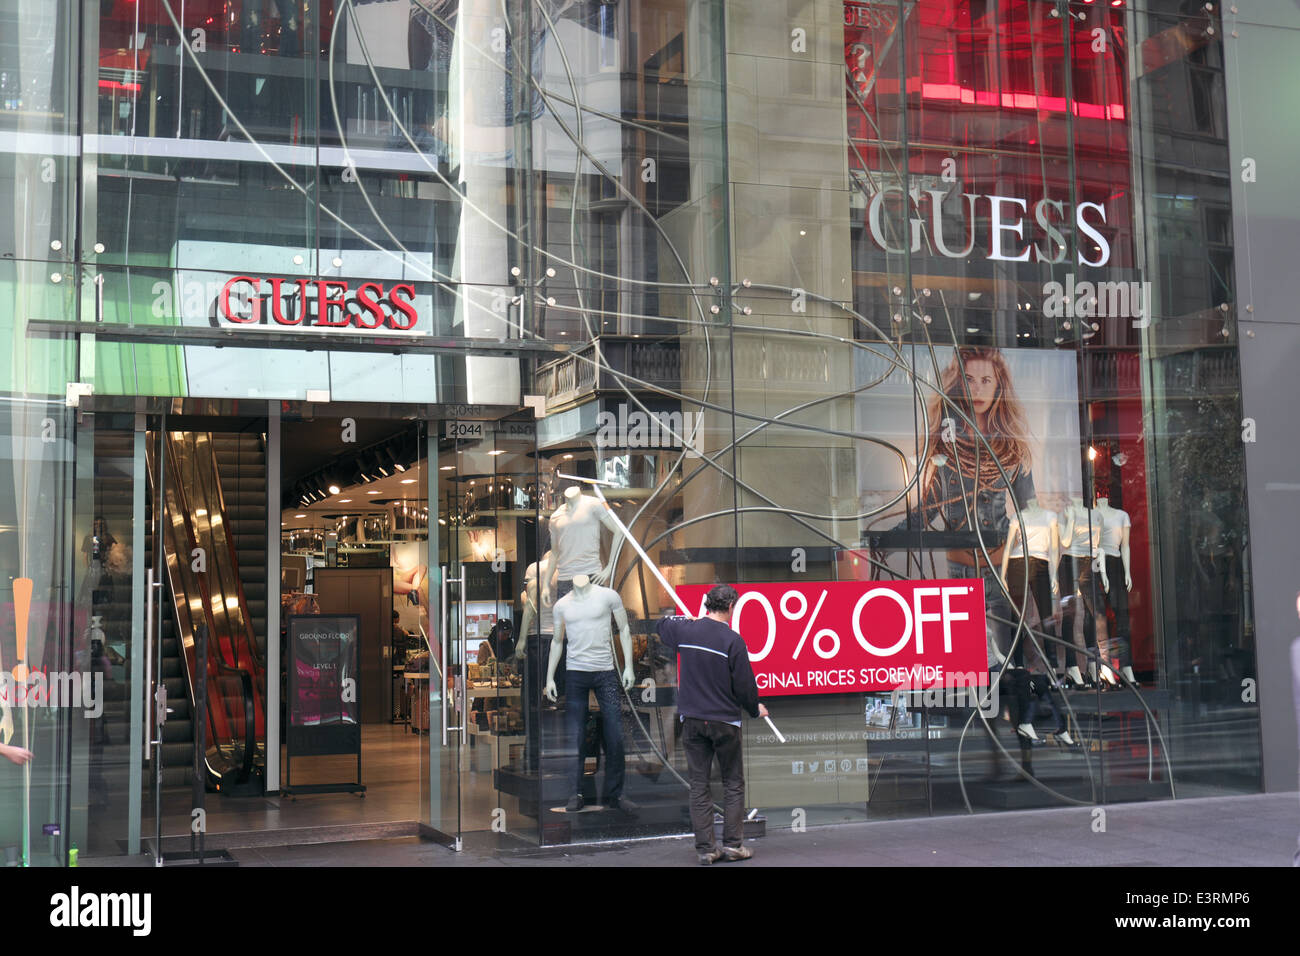 newness tin Med vilje Guess Shop High Resolution Stock Photography and Images - Alamy